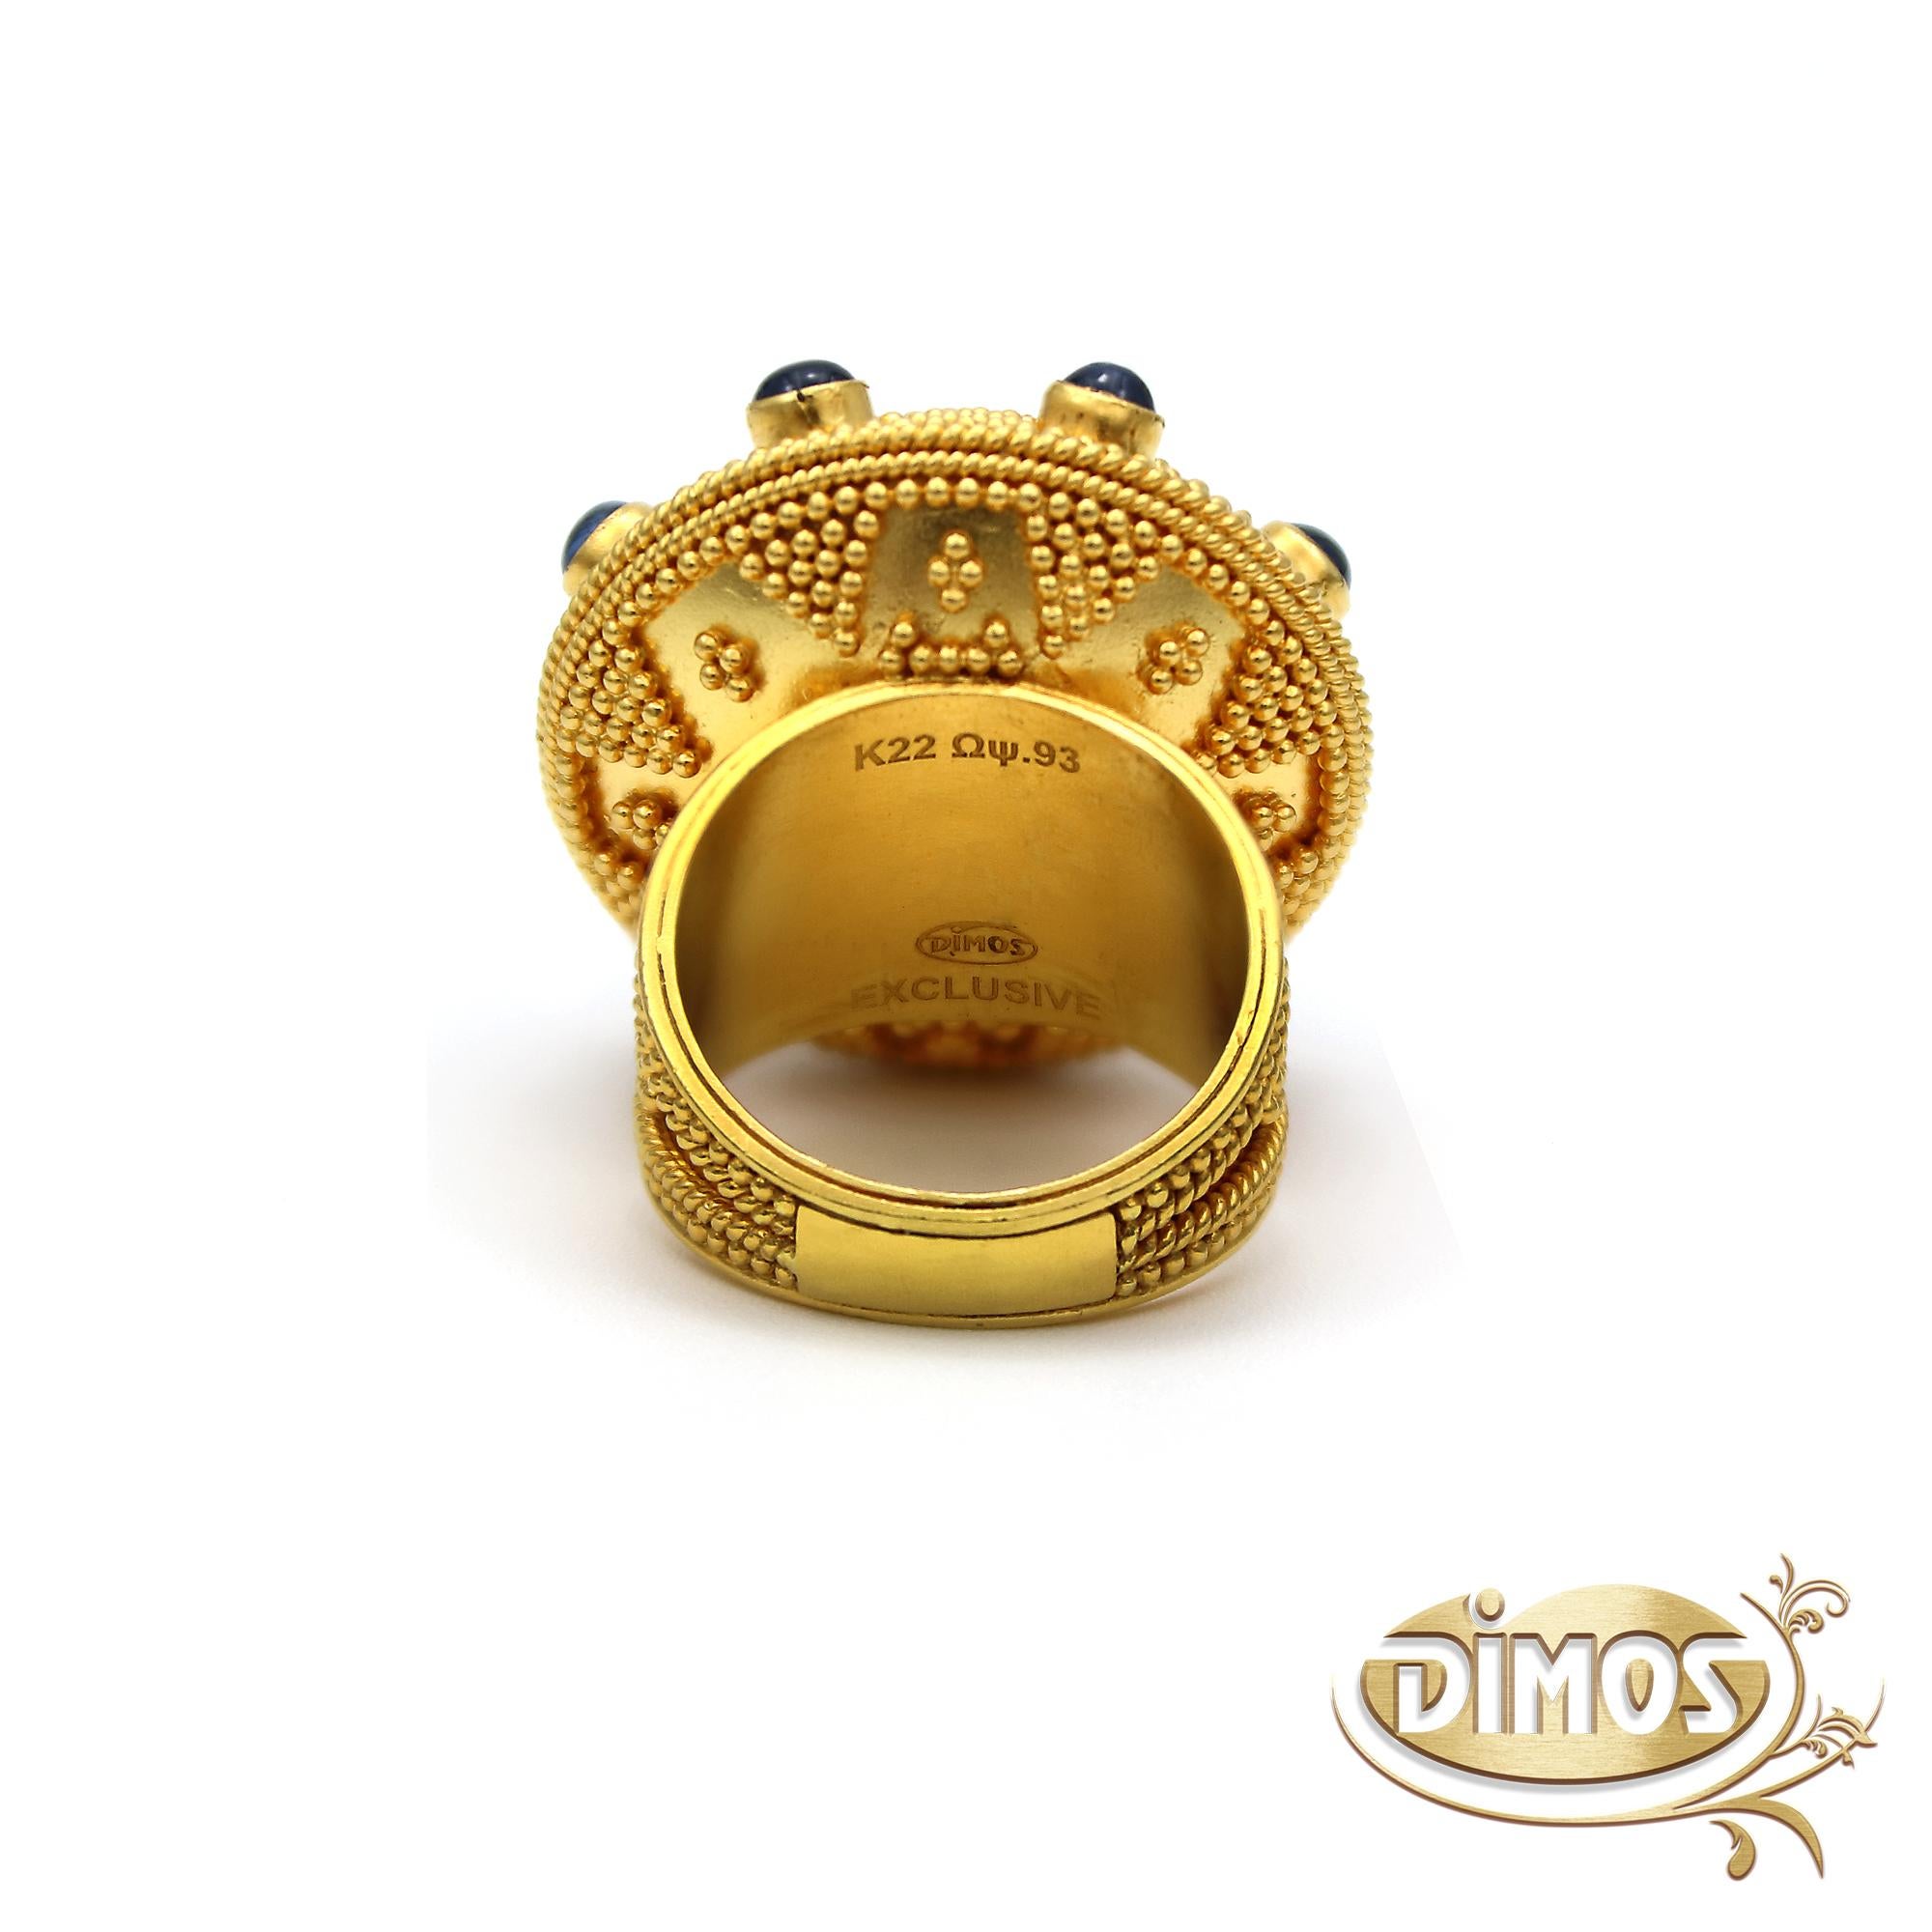 Dimos 22k Gold Byzantine Dome Cocktail Ring  For Sale 2